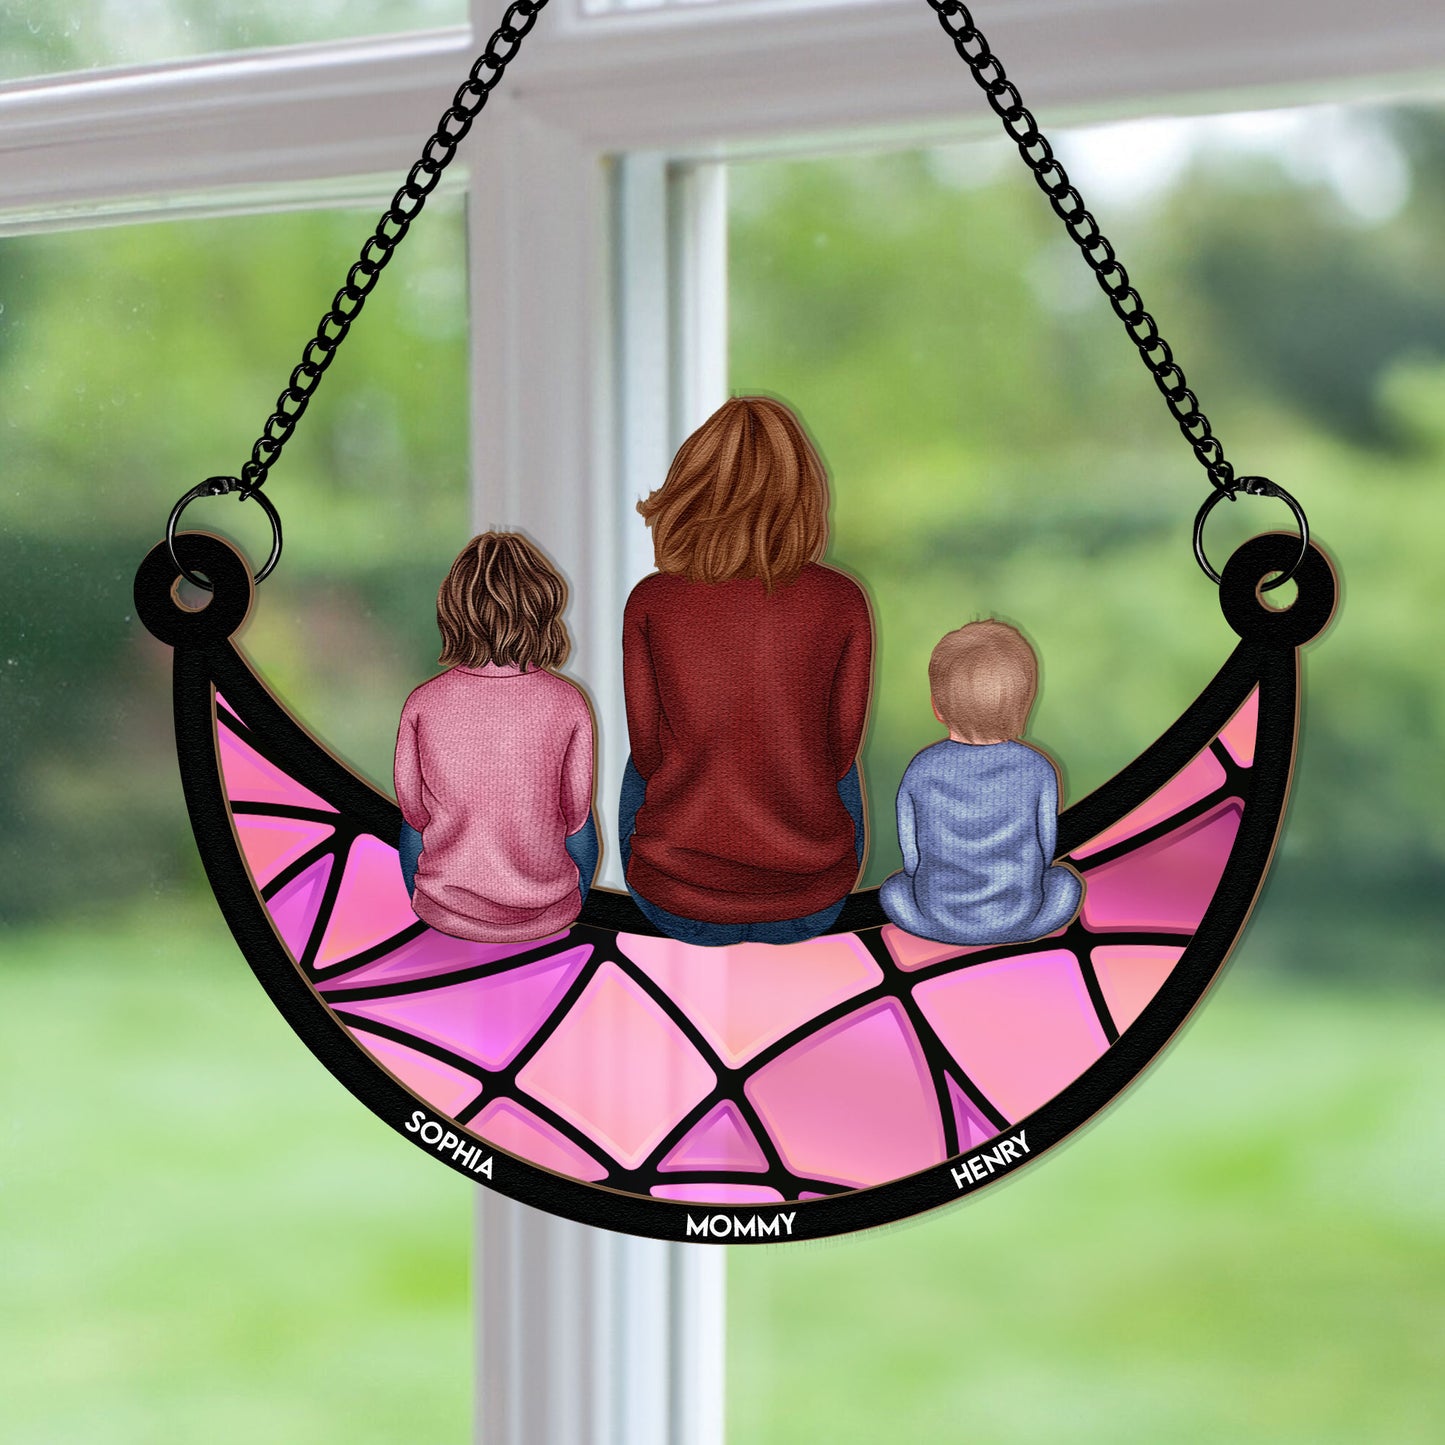 Mom And Her Kids On The Moon - Personalized Window Hanging Suncatcher Ornament